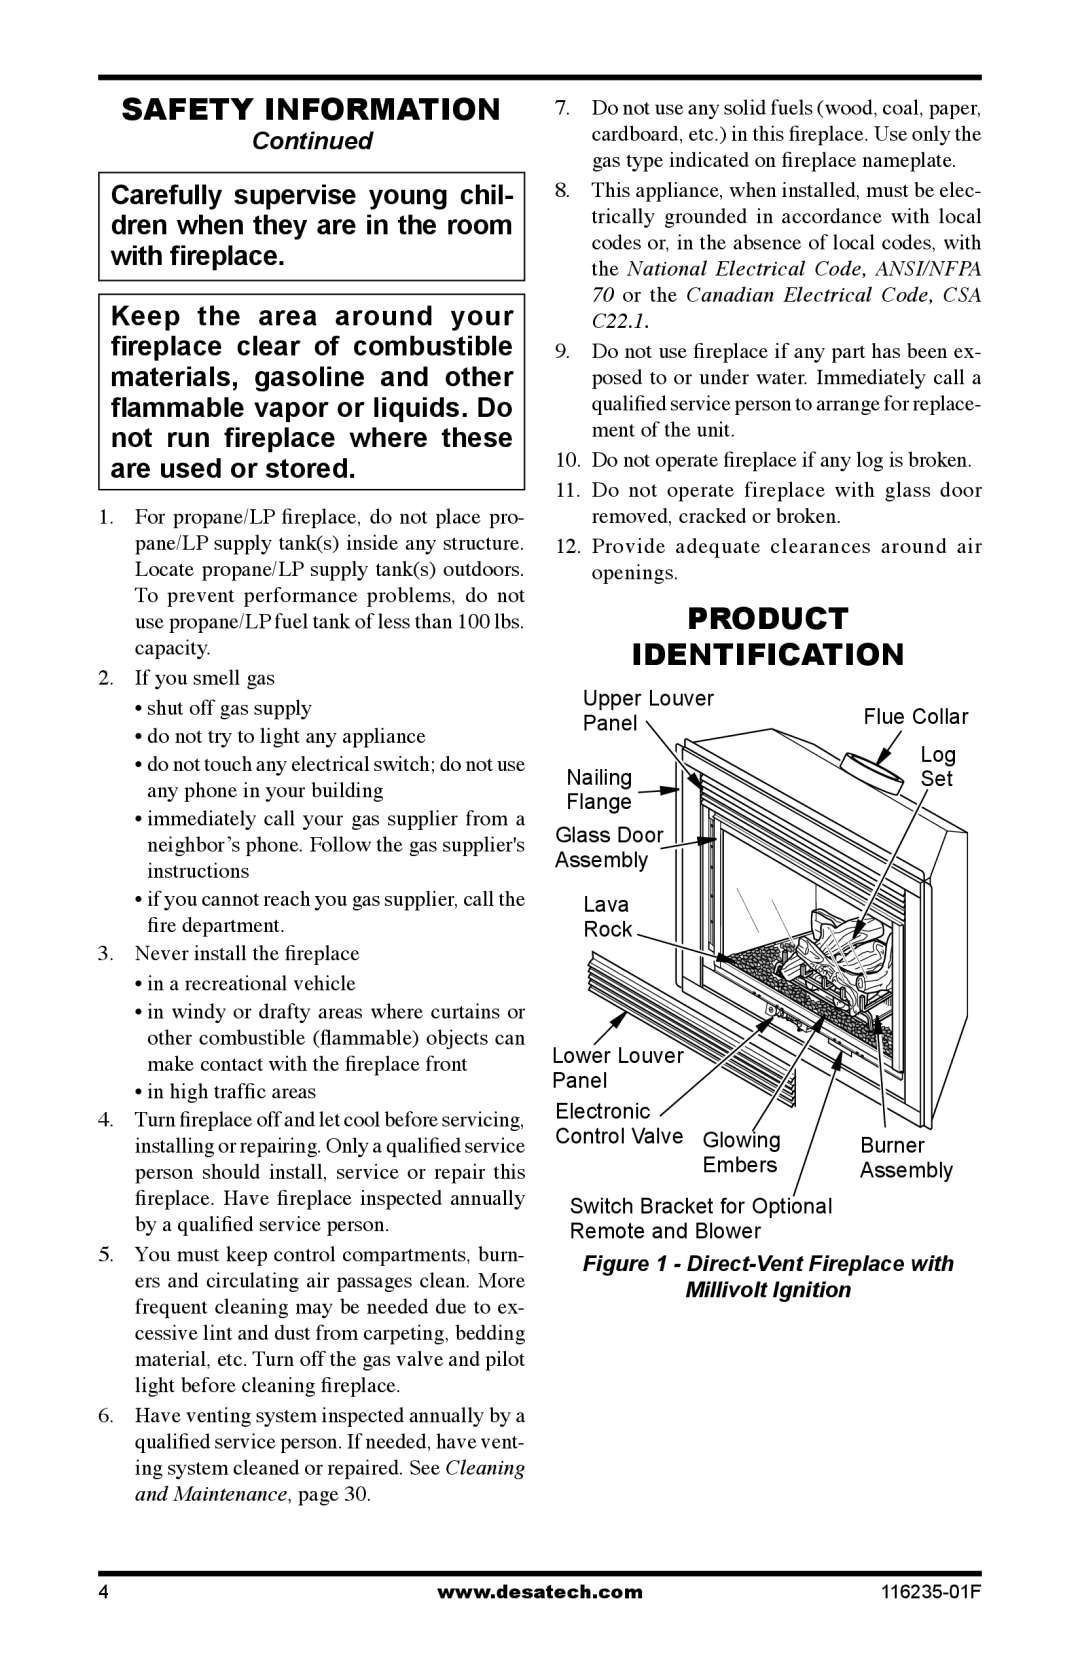 Desa (V)VC36PE Series installation manual Safety information, Product Identification, Continued 